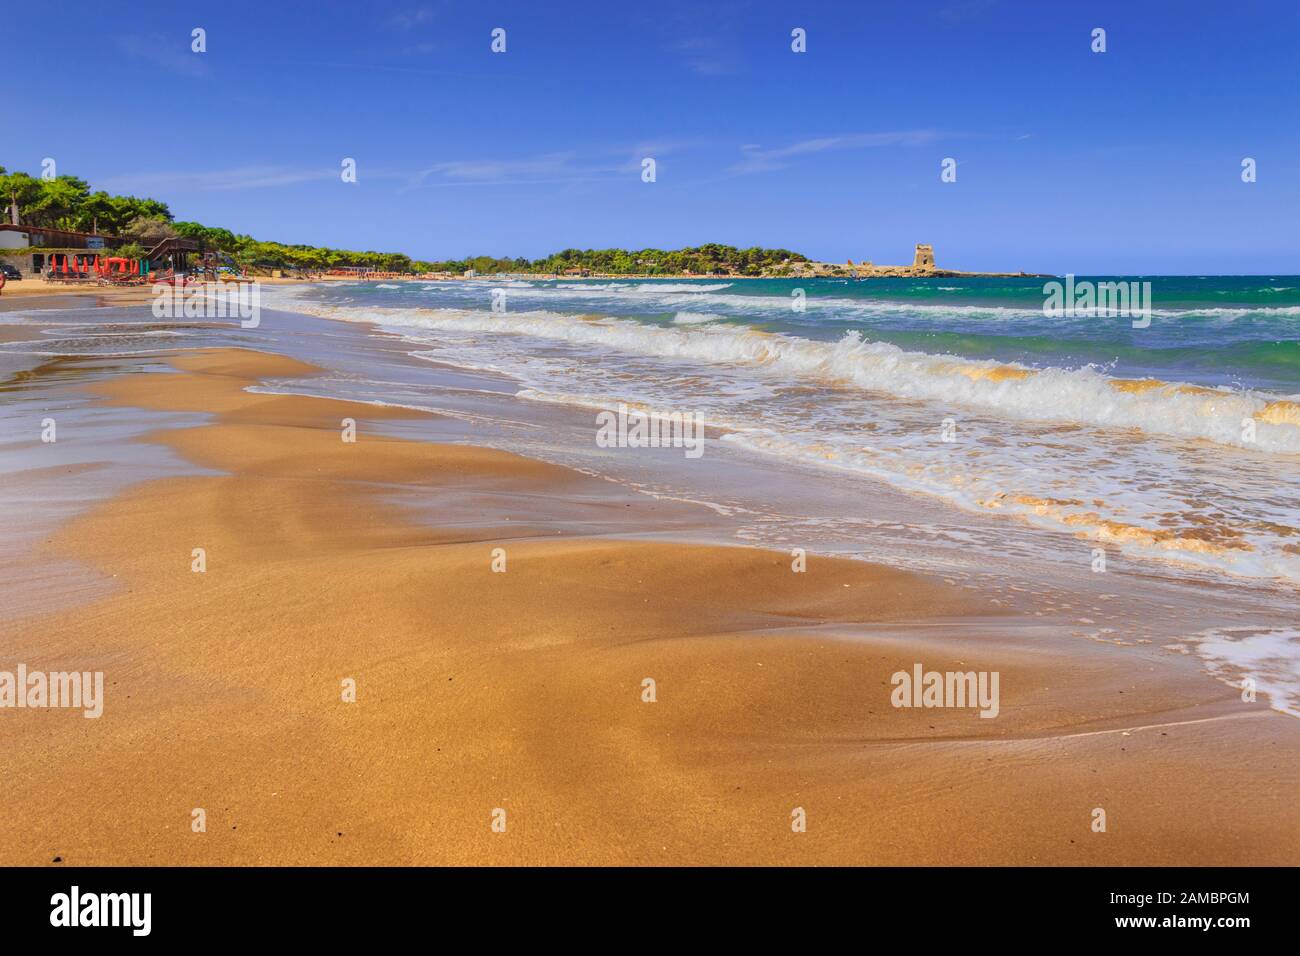 Apulia beach: Bay of Sfinale, surrounded by thick Mediterranean scrub, marks the border between Peschici and Vieste. Stock Photo